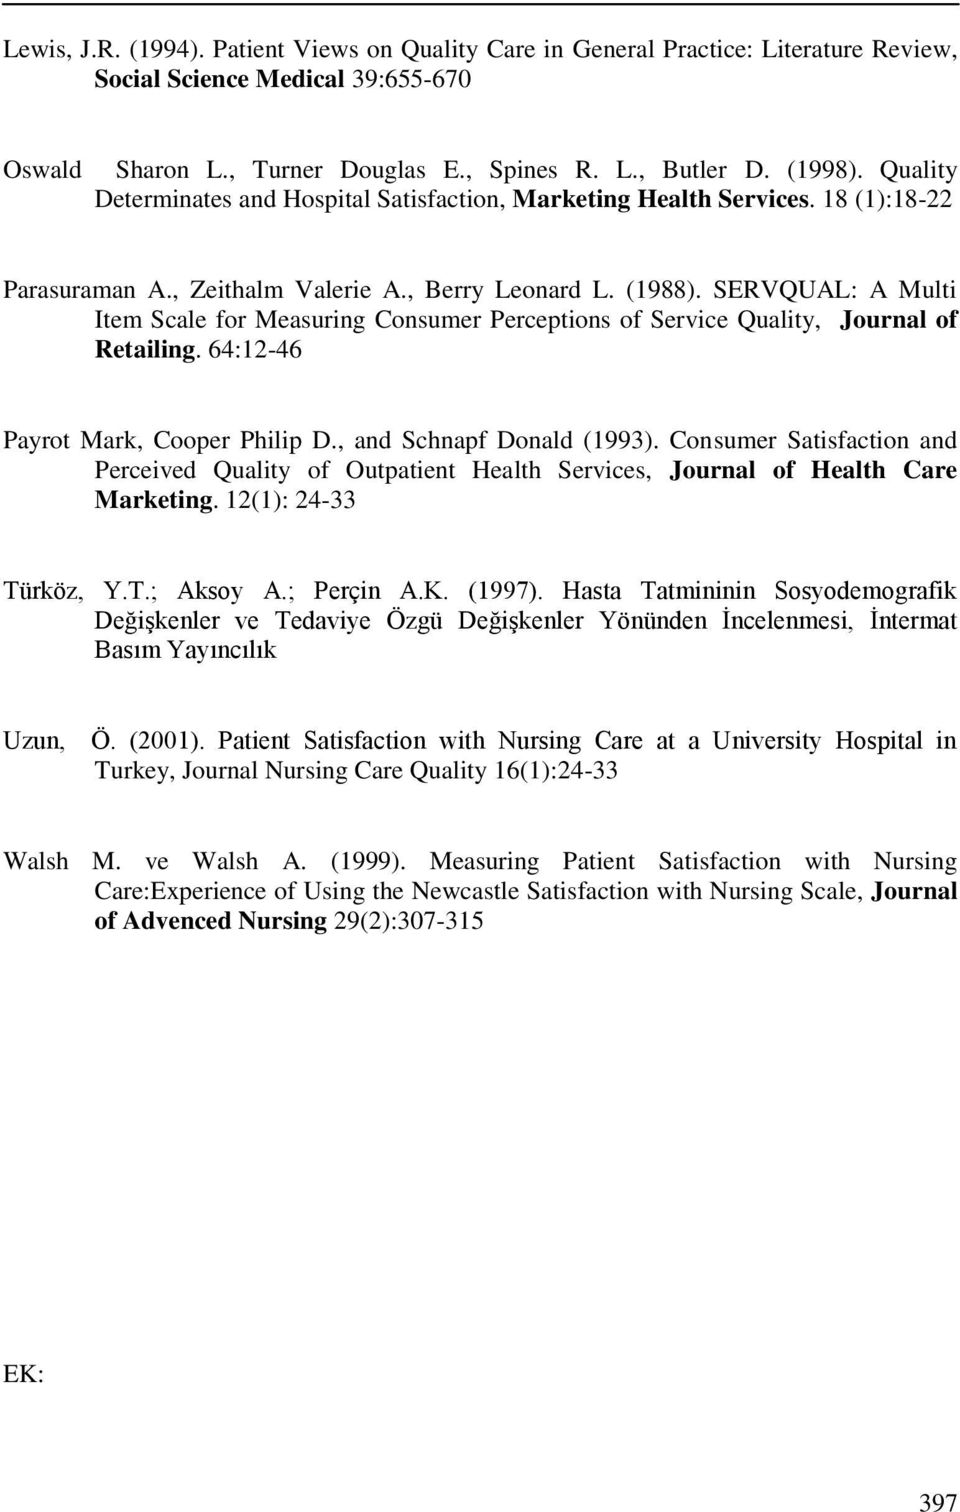 SERVQUAL: A Multi Item Scale for Measuring Consumer Perceptions of Service Quality, Journal of Retailing. 64:12-46 Payrot Mark, Cooper Philip D., and Schnapf Donald (1993).